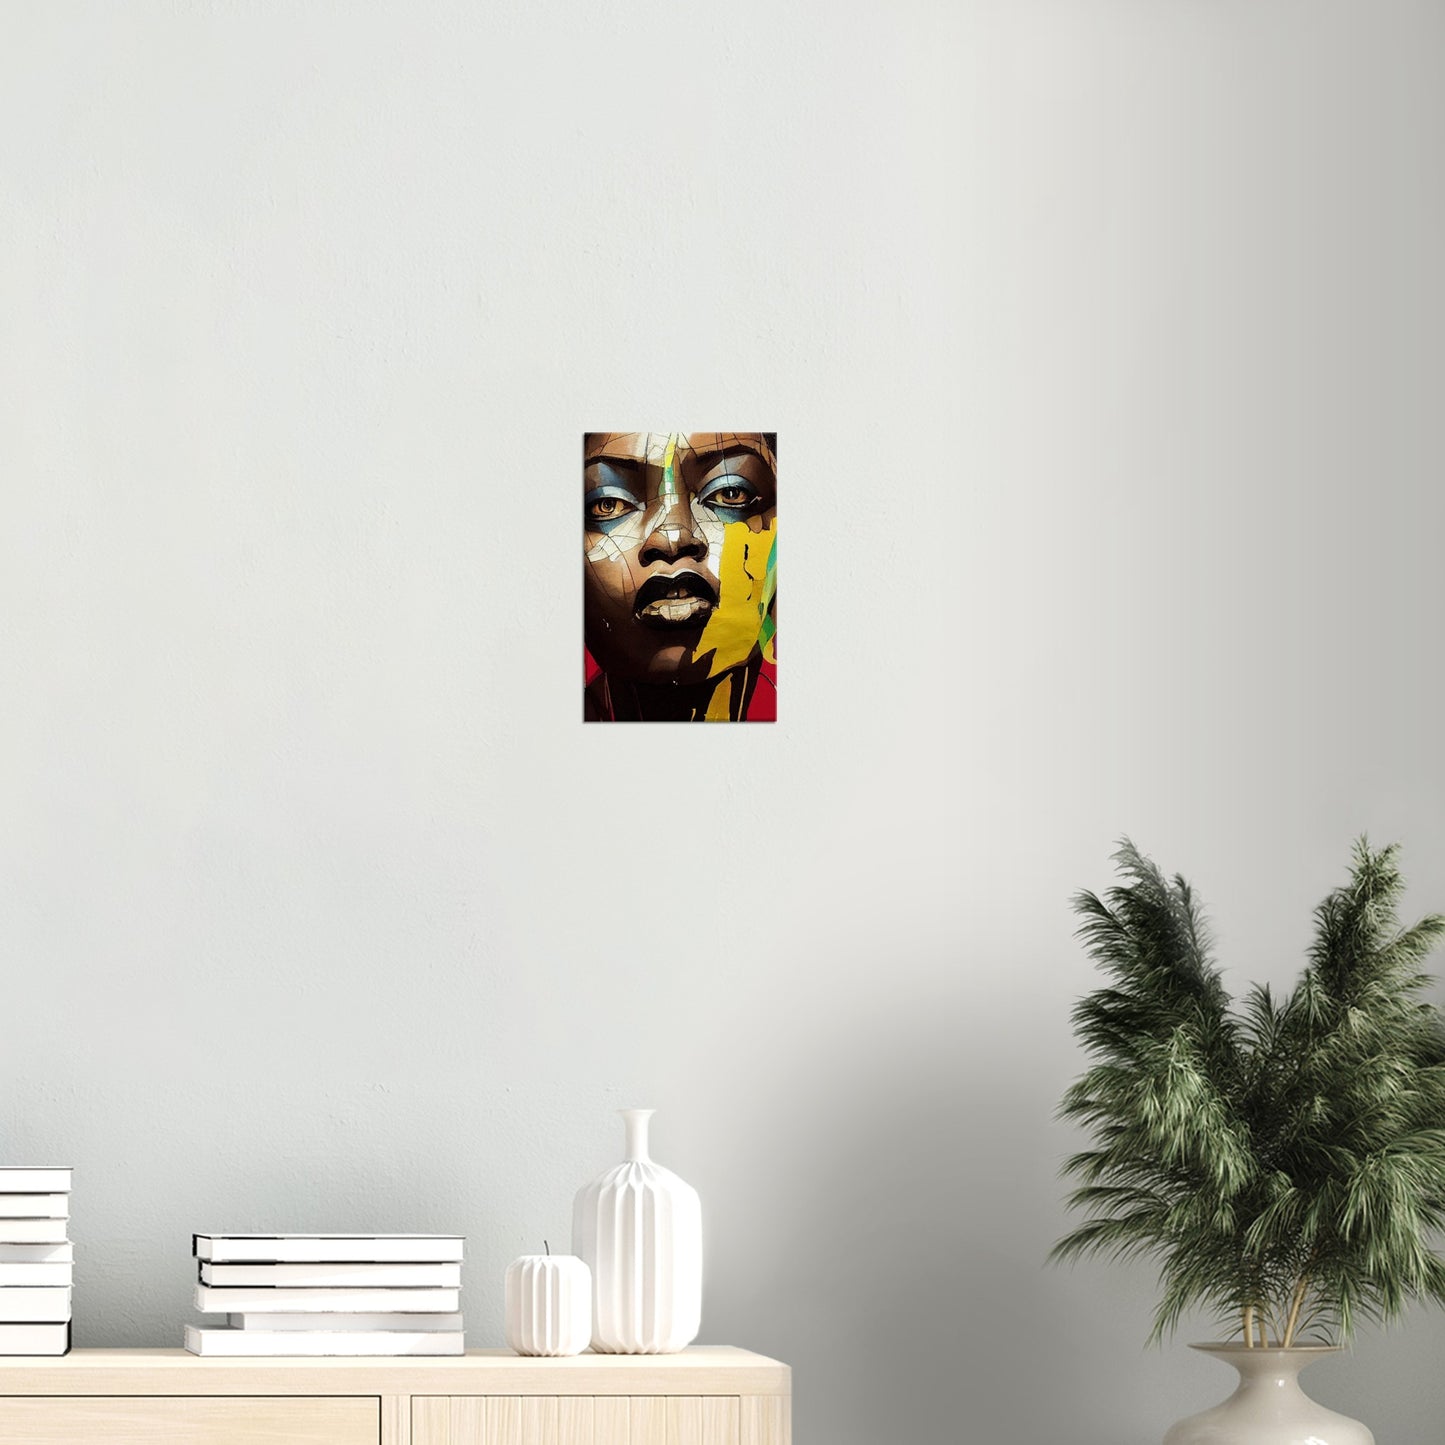 African vibes - Urban Art on Canvas